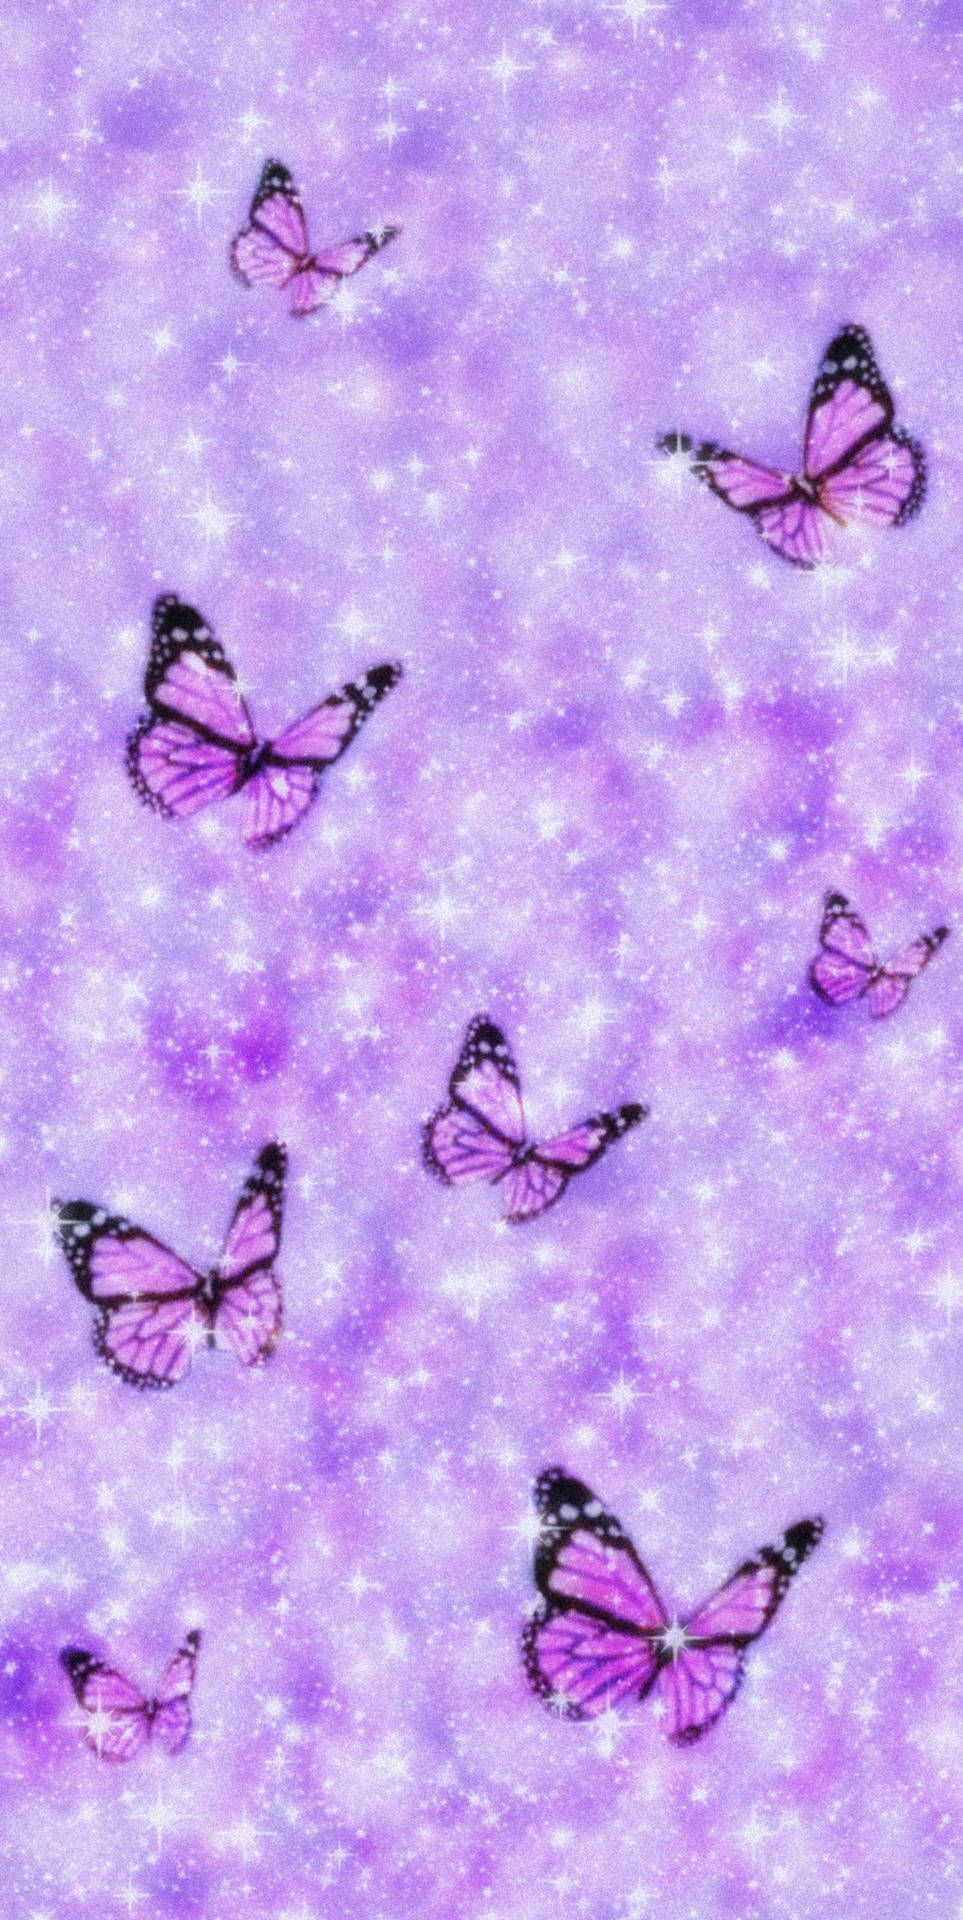 A group of purple butterflies flying over the sky - Butterfly